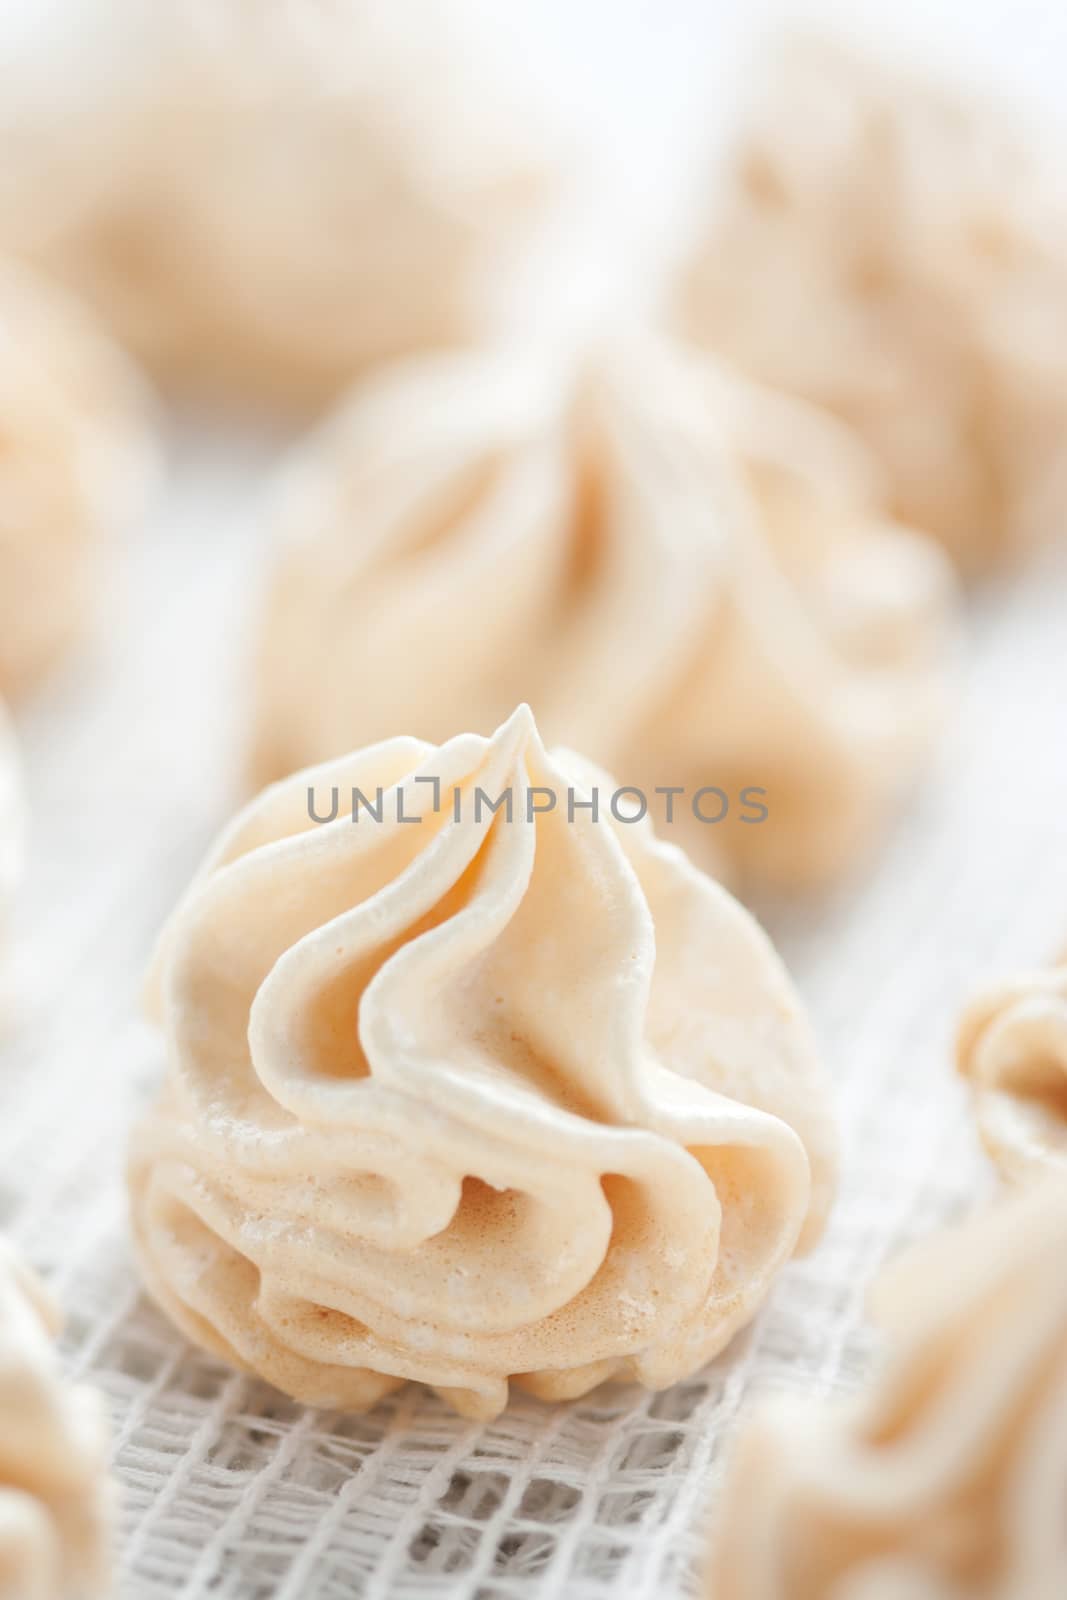 Meringues on white tablecloth, shallow dof.